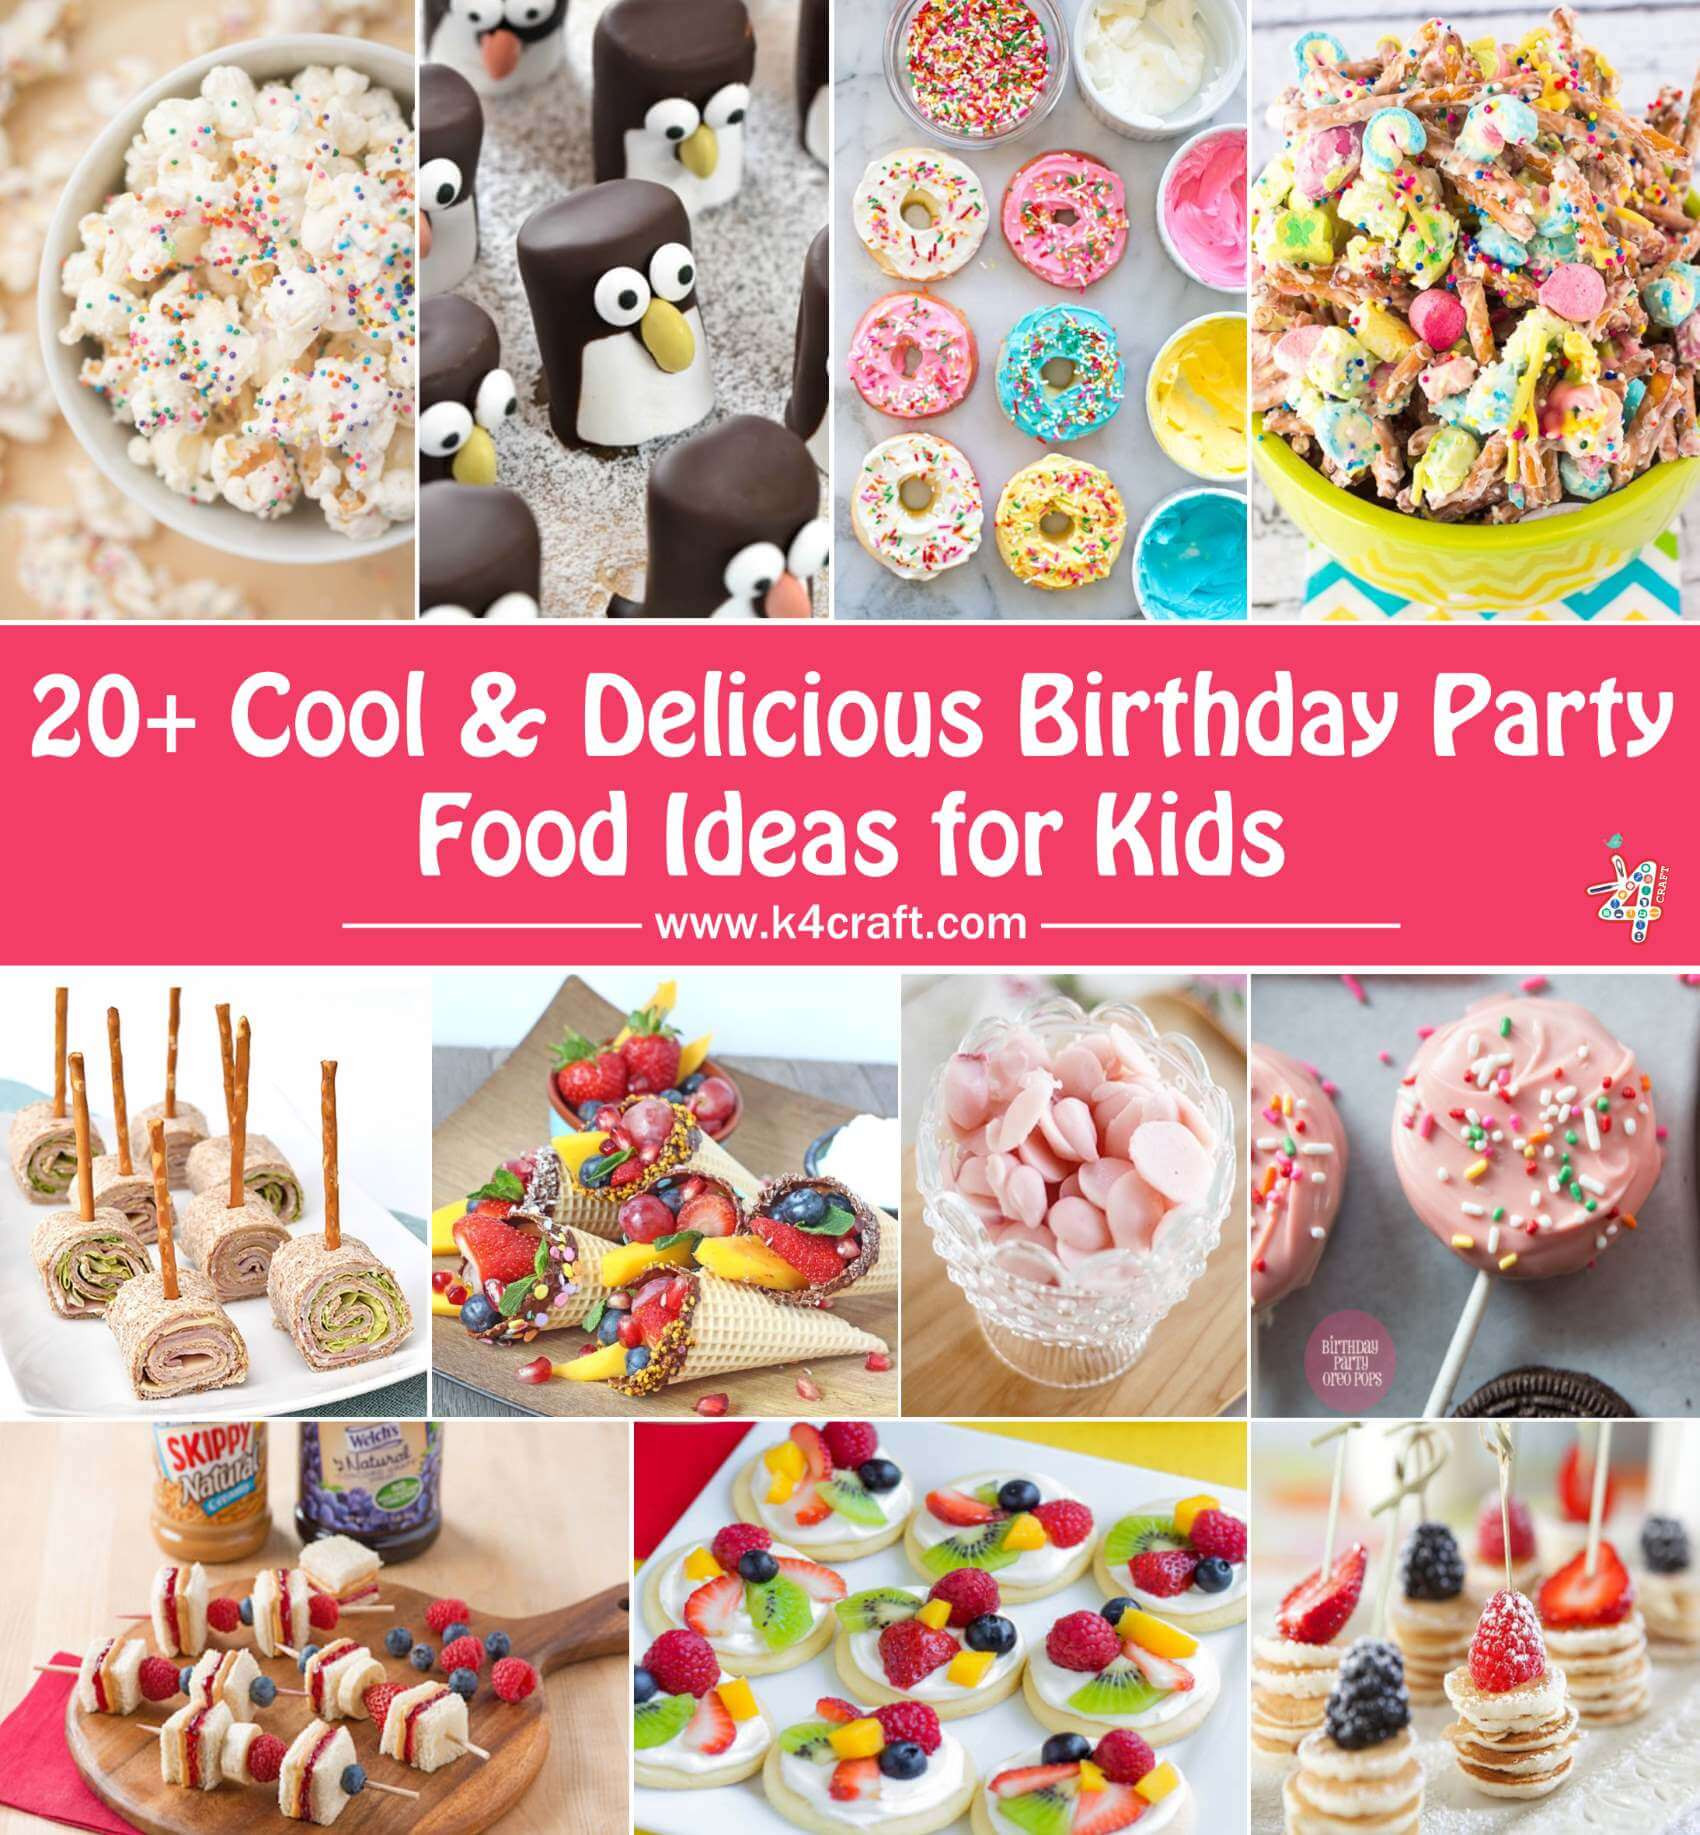 Food Ideas For Kids Birthday Party
 Cool & Delicious Birthday Party Food Ideas for Kids • K4 Craft